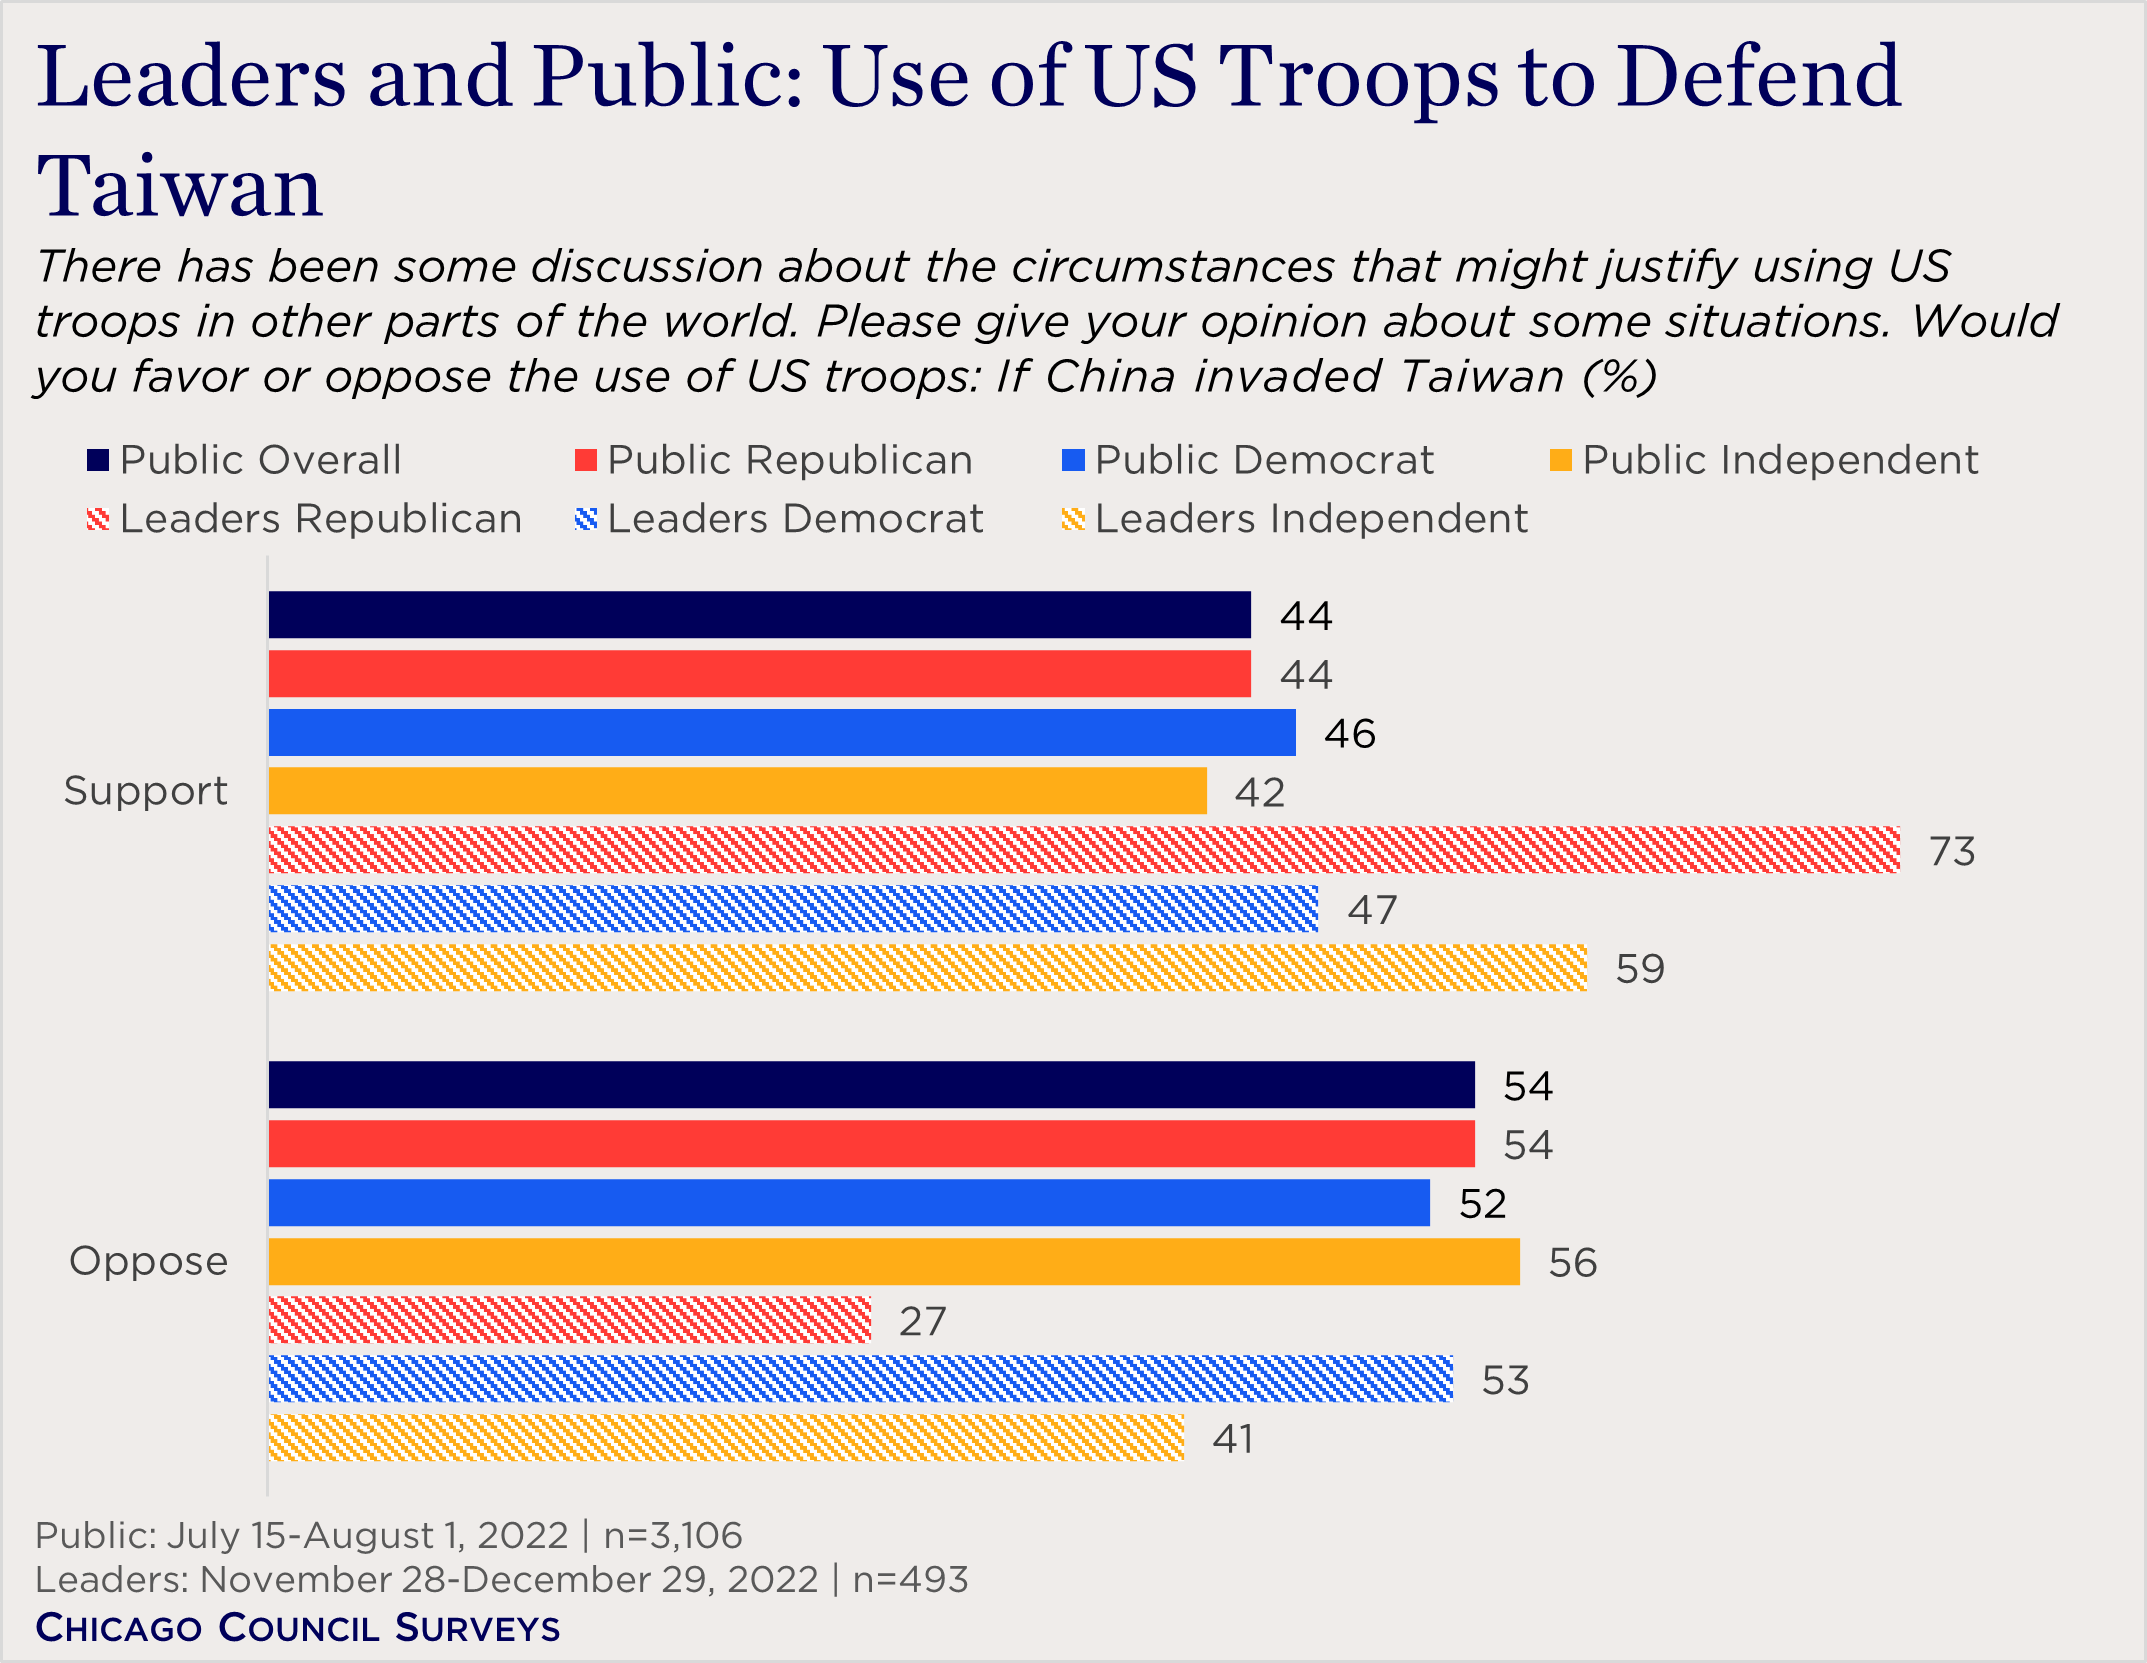 "bar chart showing support for using US troops to defend Tawain"